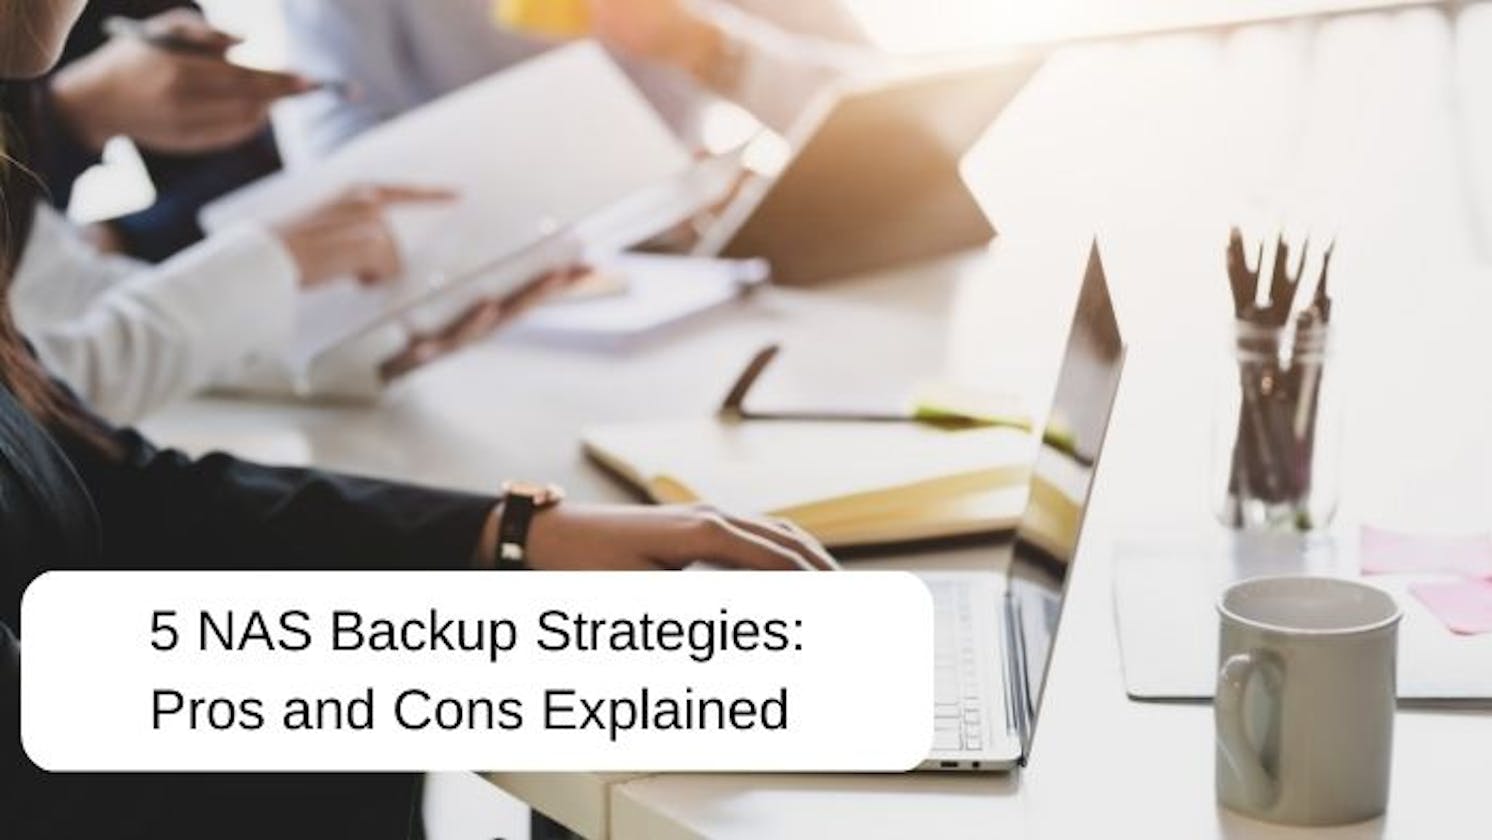 5 NAS Backup Strategies: Pros and Cons Explained